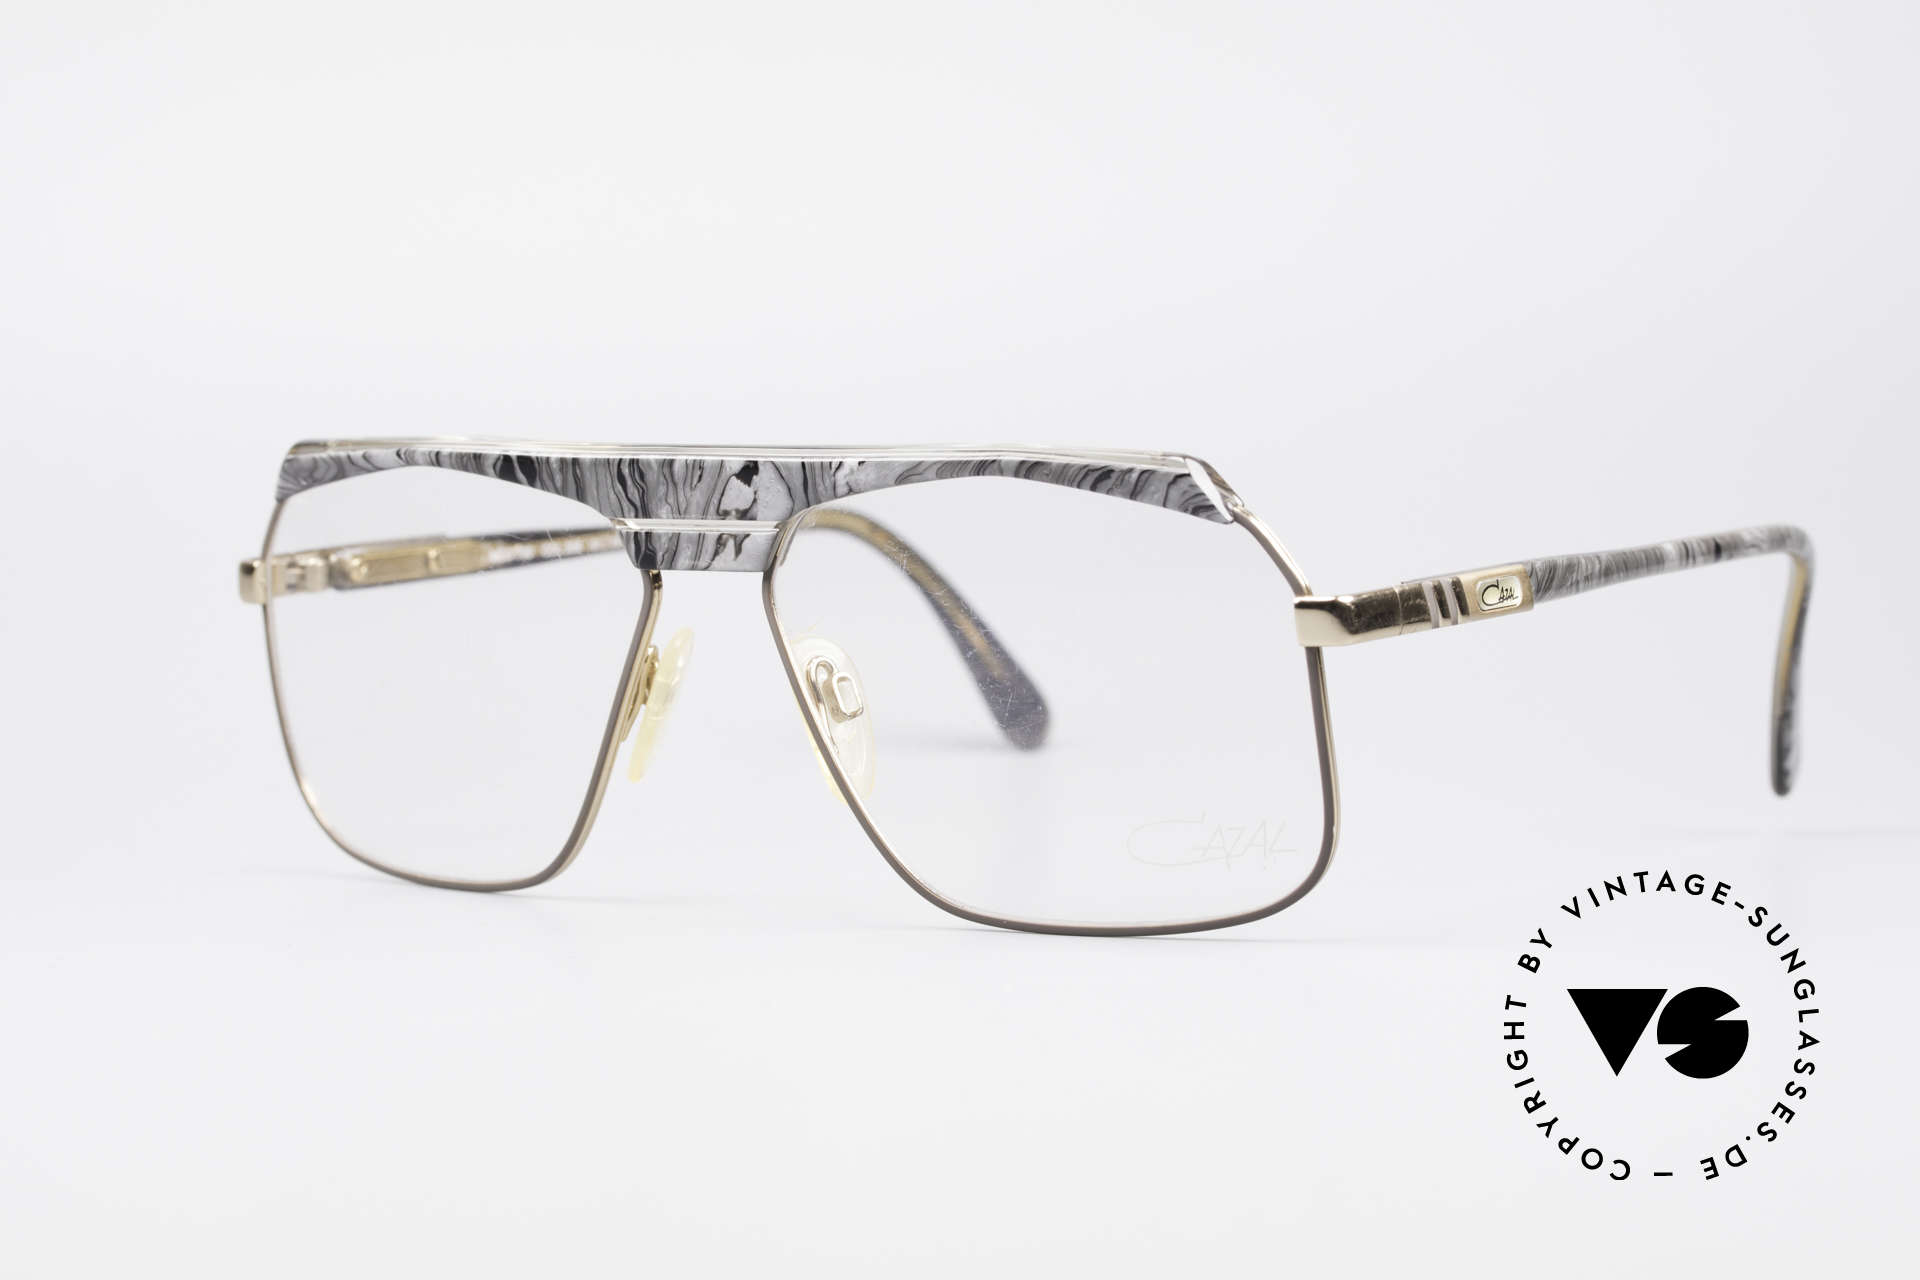 Cazal 730 80's West Germany Glasses, authentic "W. Germany" frame (collector's item), Made for Men